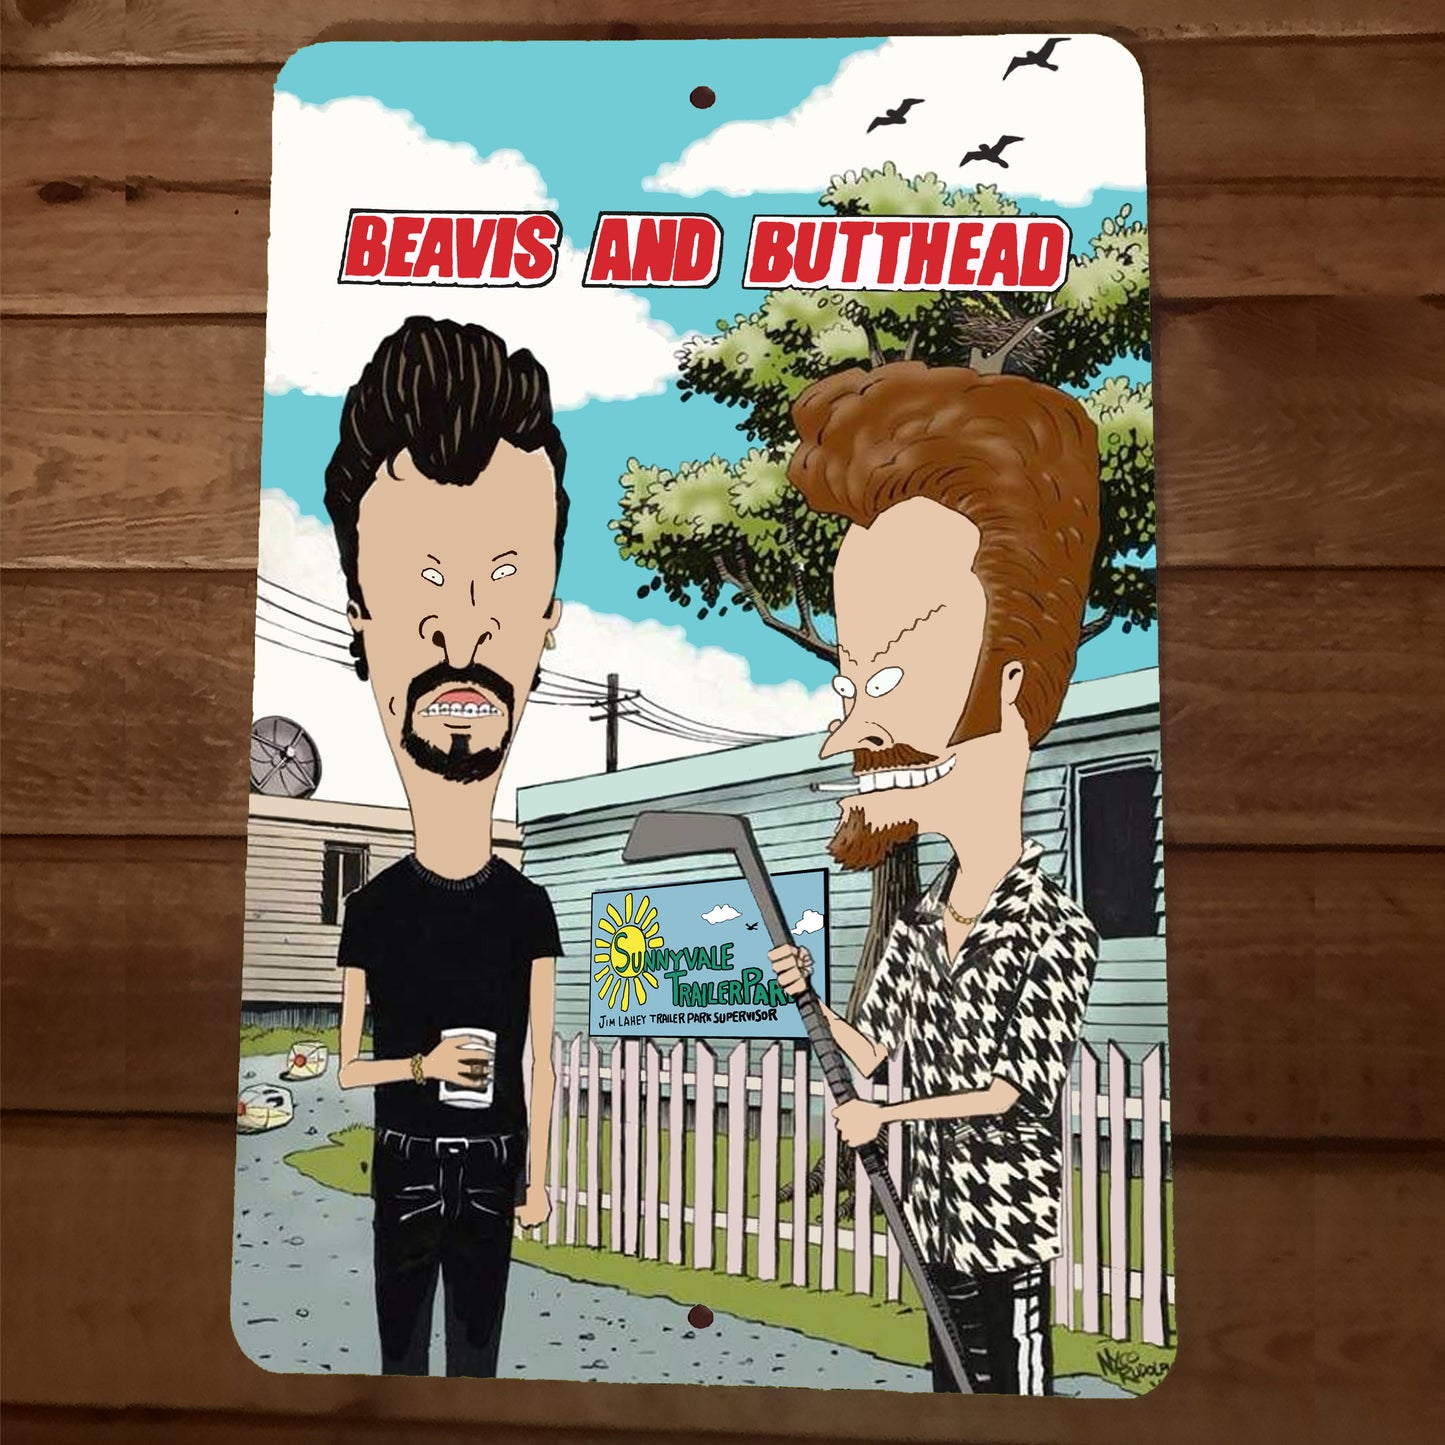 Bundle of Butts 5 Beavis and Butthead 8x12 Metal Walls Signs and Mouse pad